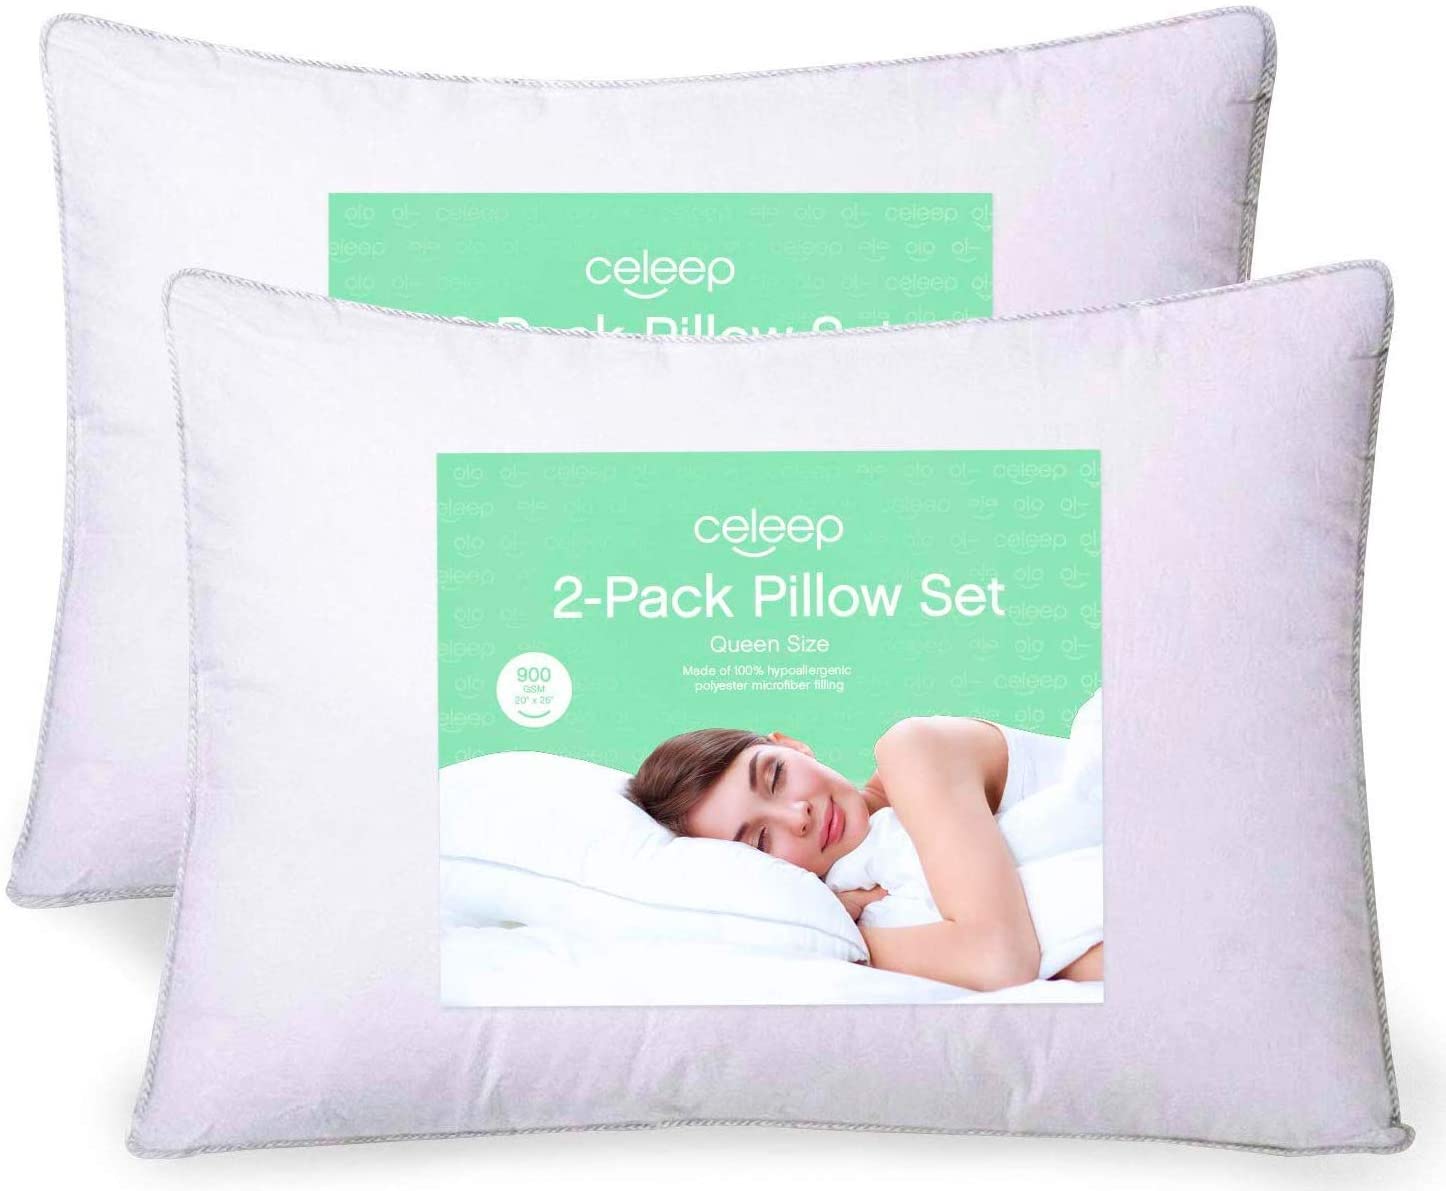 Review of Celeep 2-Pack Queen Bed Pillows for Sleeping - 20 x 26 Inches Pillow - 900GSM